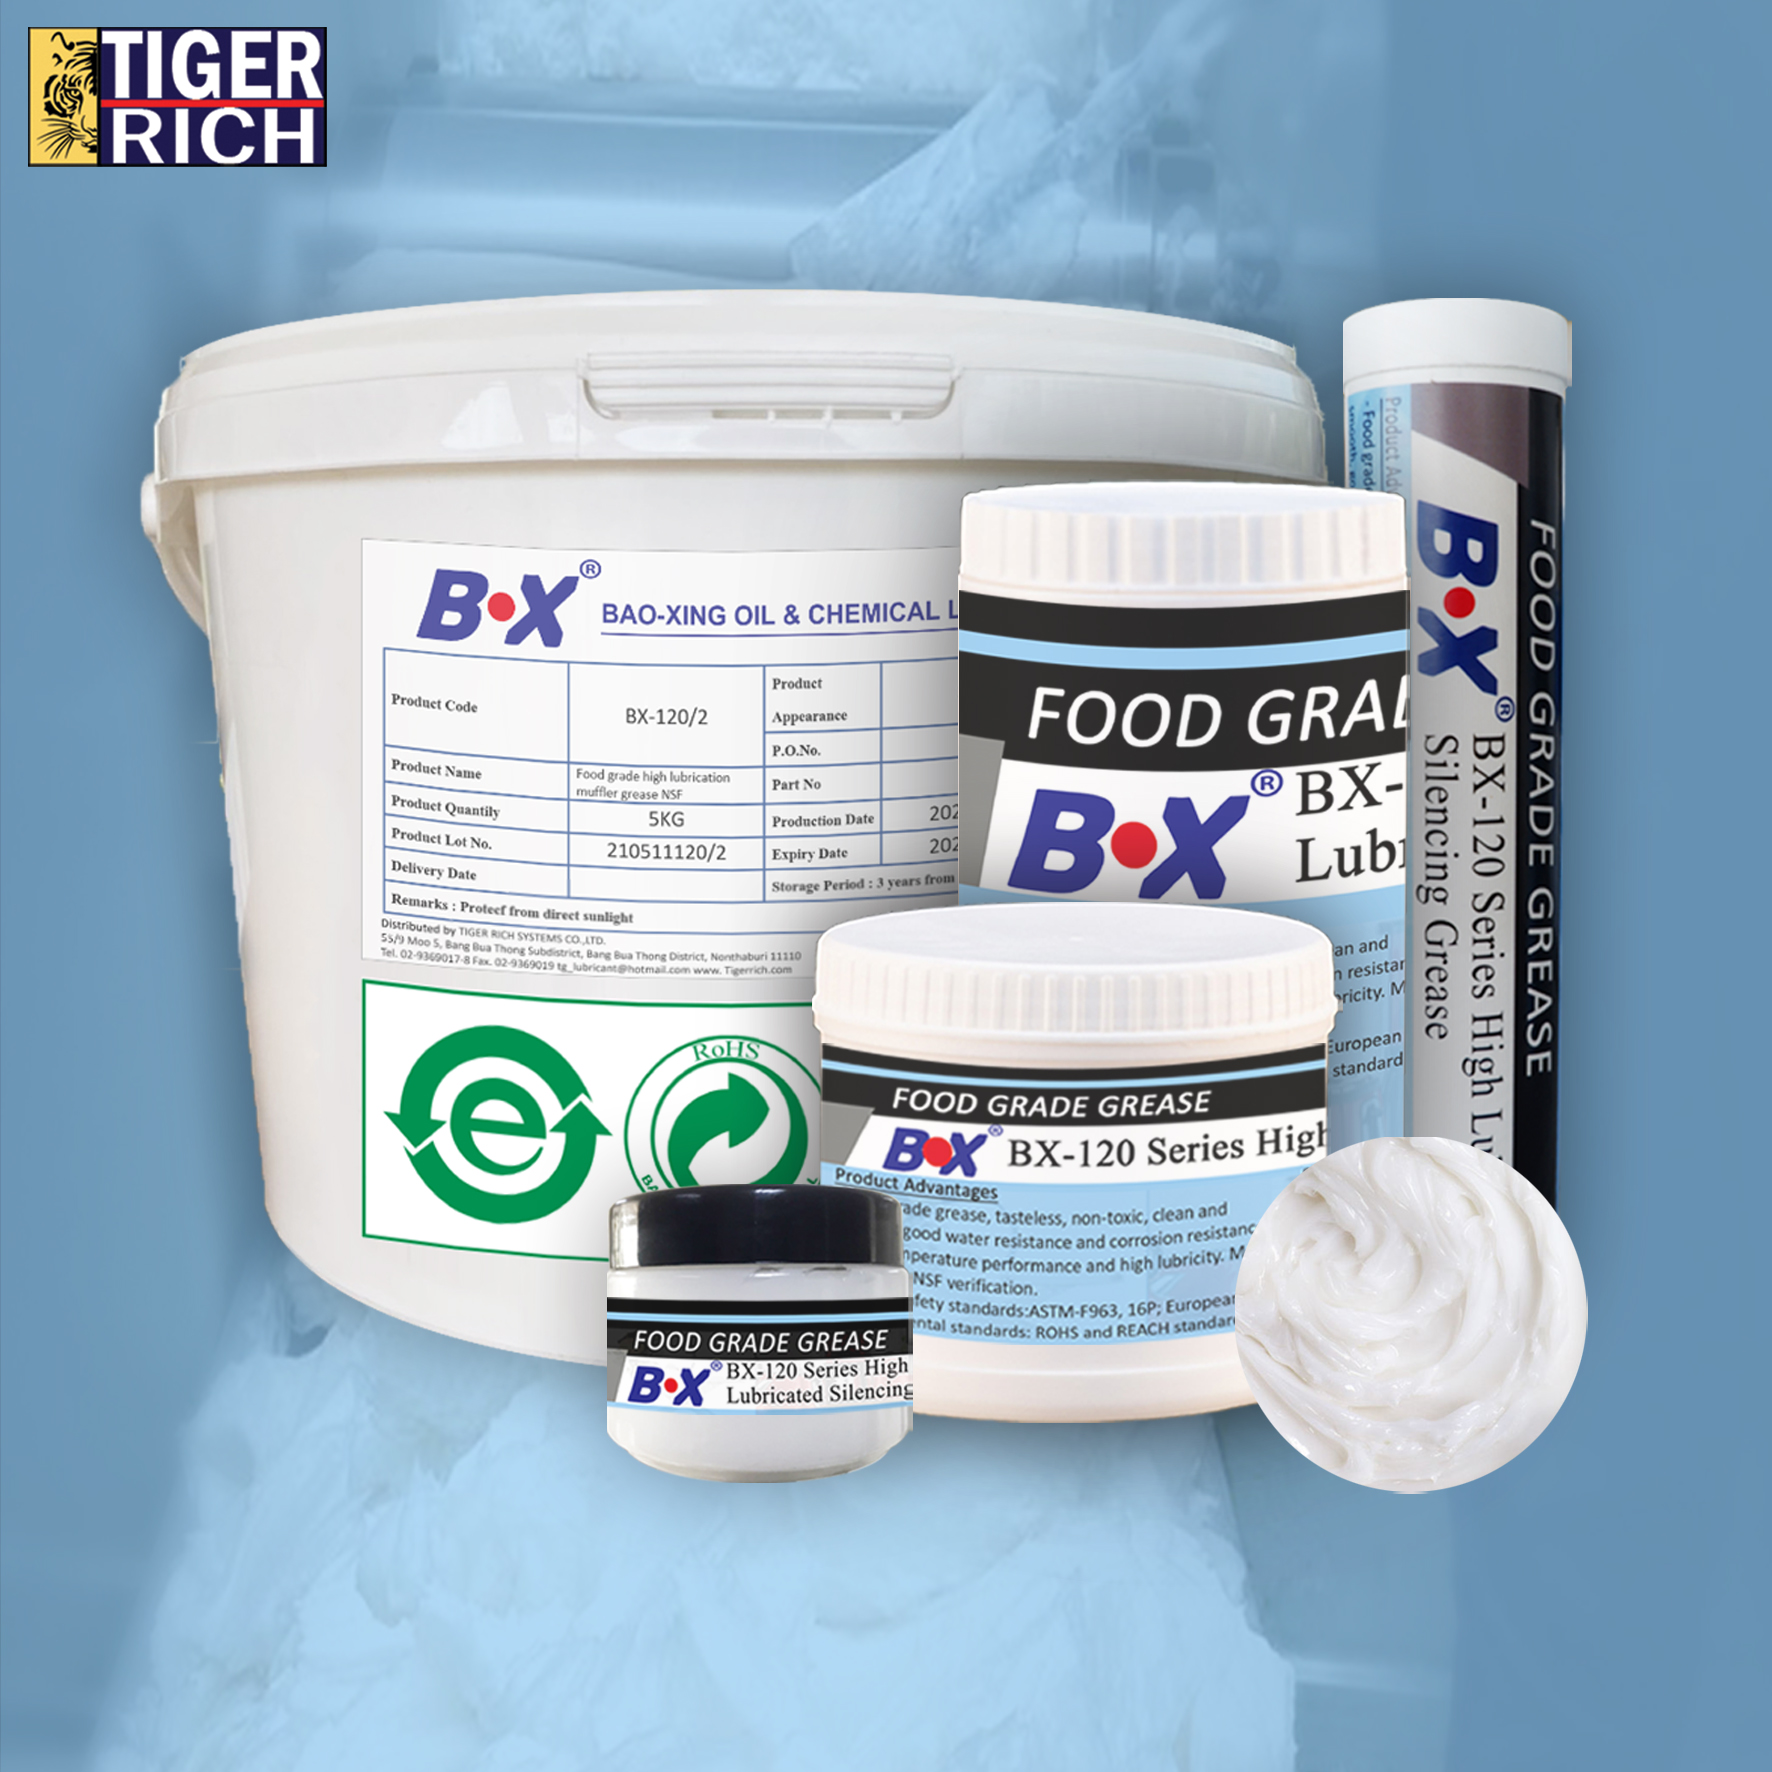 BX-120 Heavy Duty Grease High Lubricated Silencing 